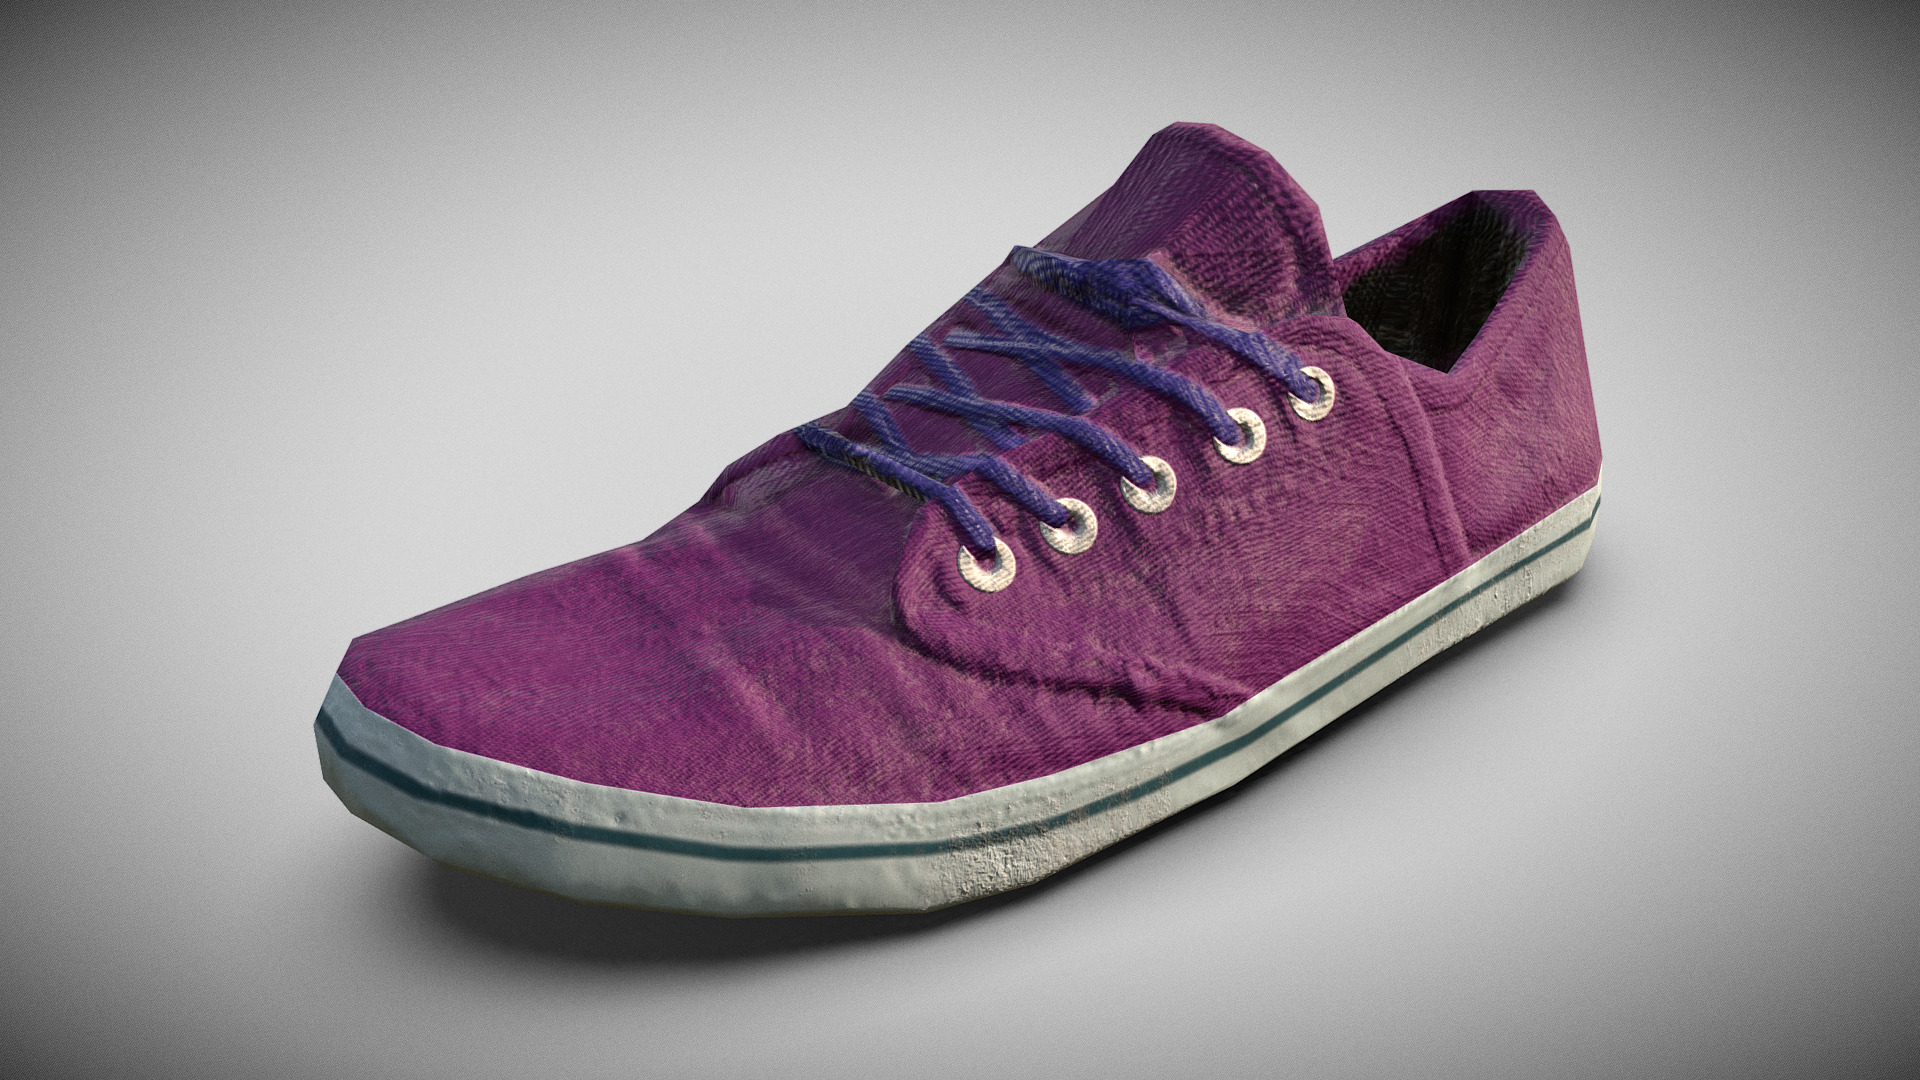 3D model Light shoes – Custom commission - This is a 3D model of the Light shoes - Custom commission. The 3D model is about a purple and white shoe.